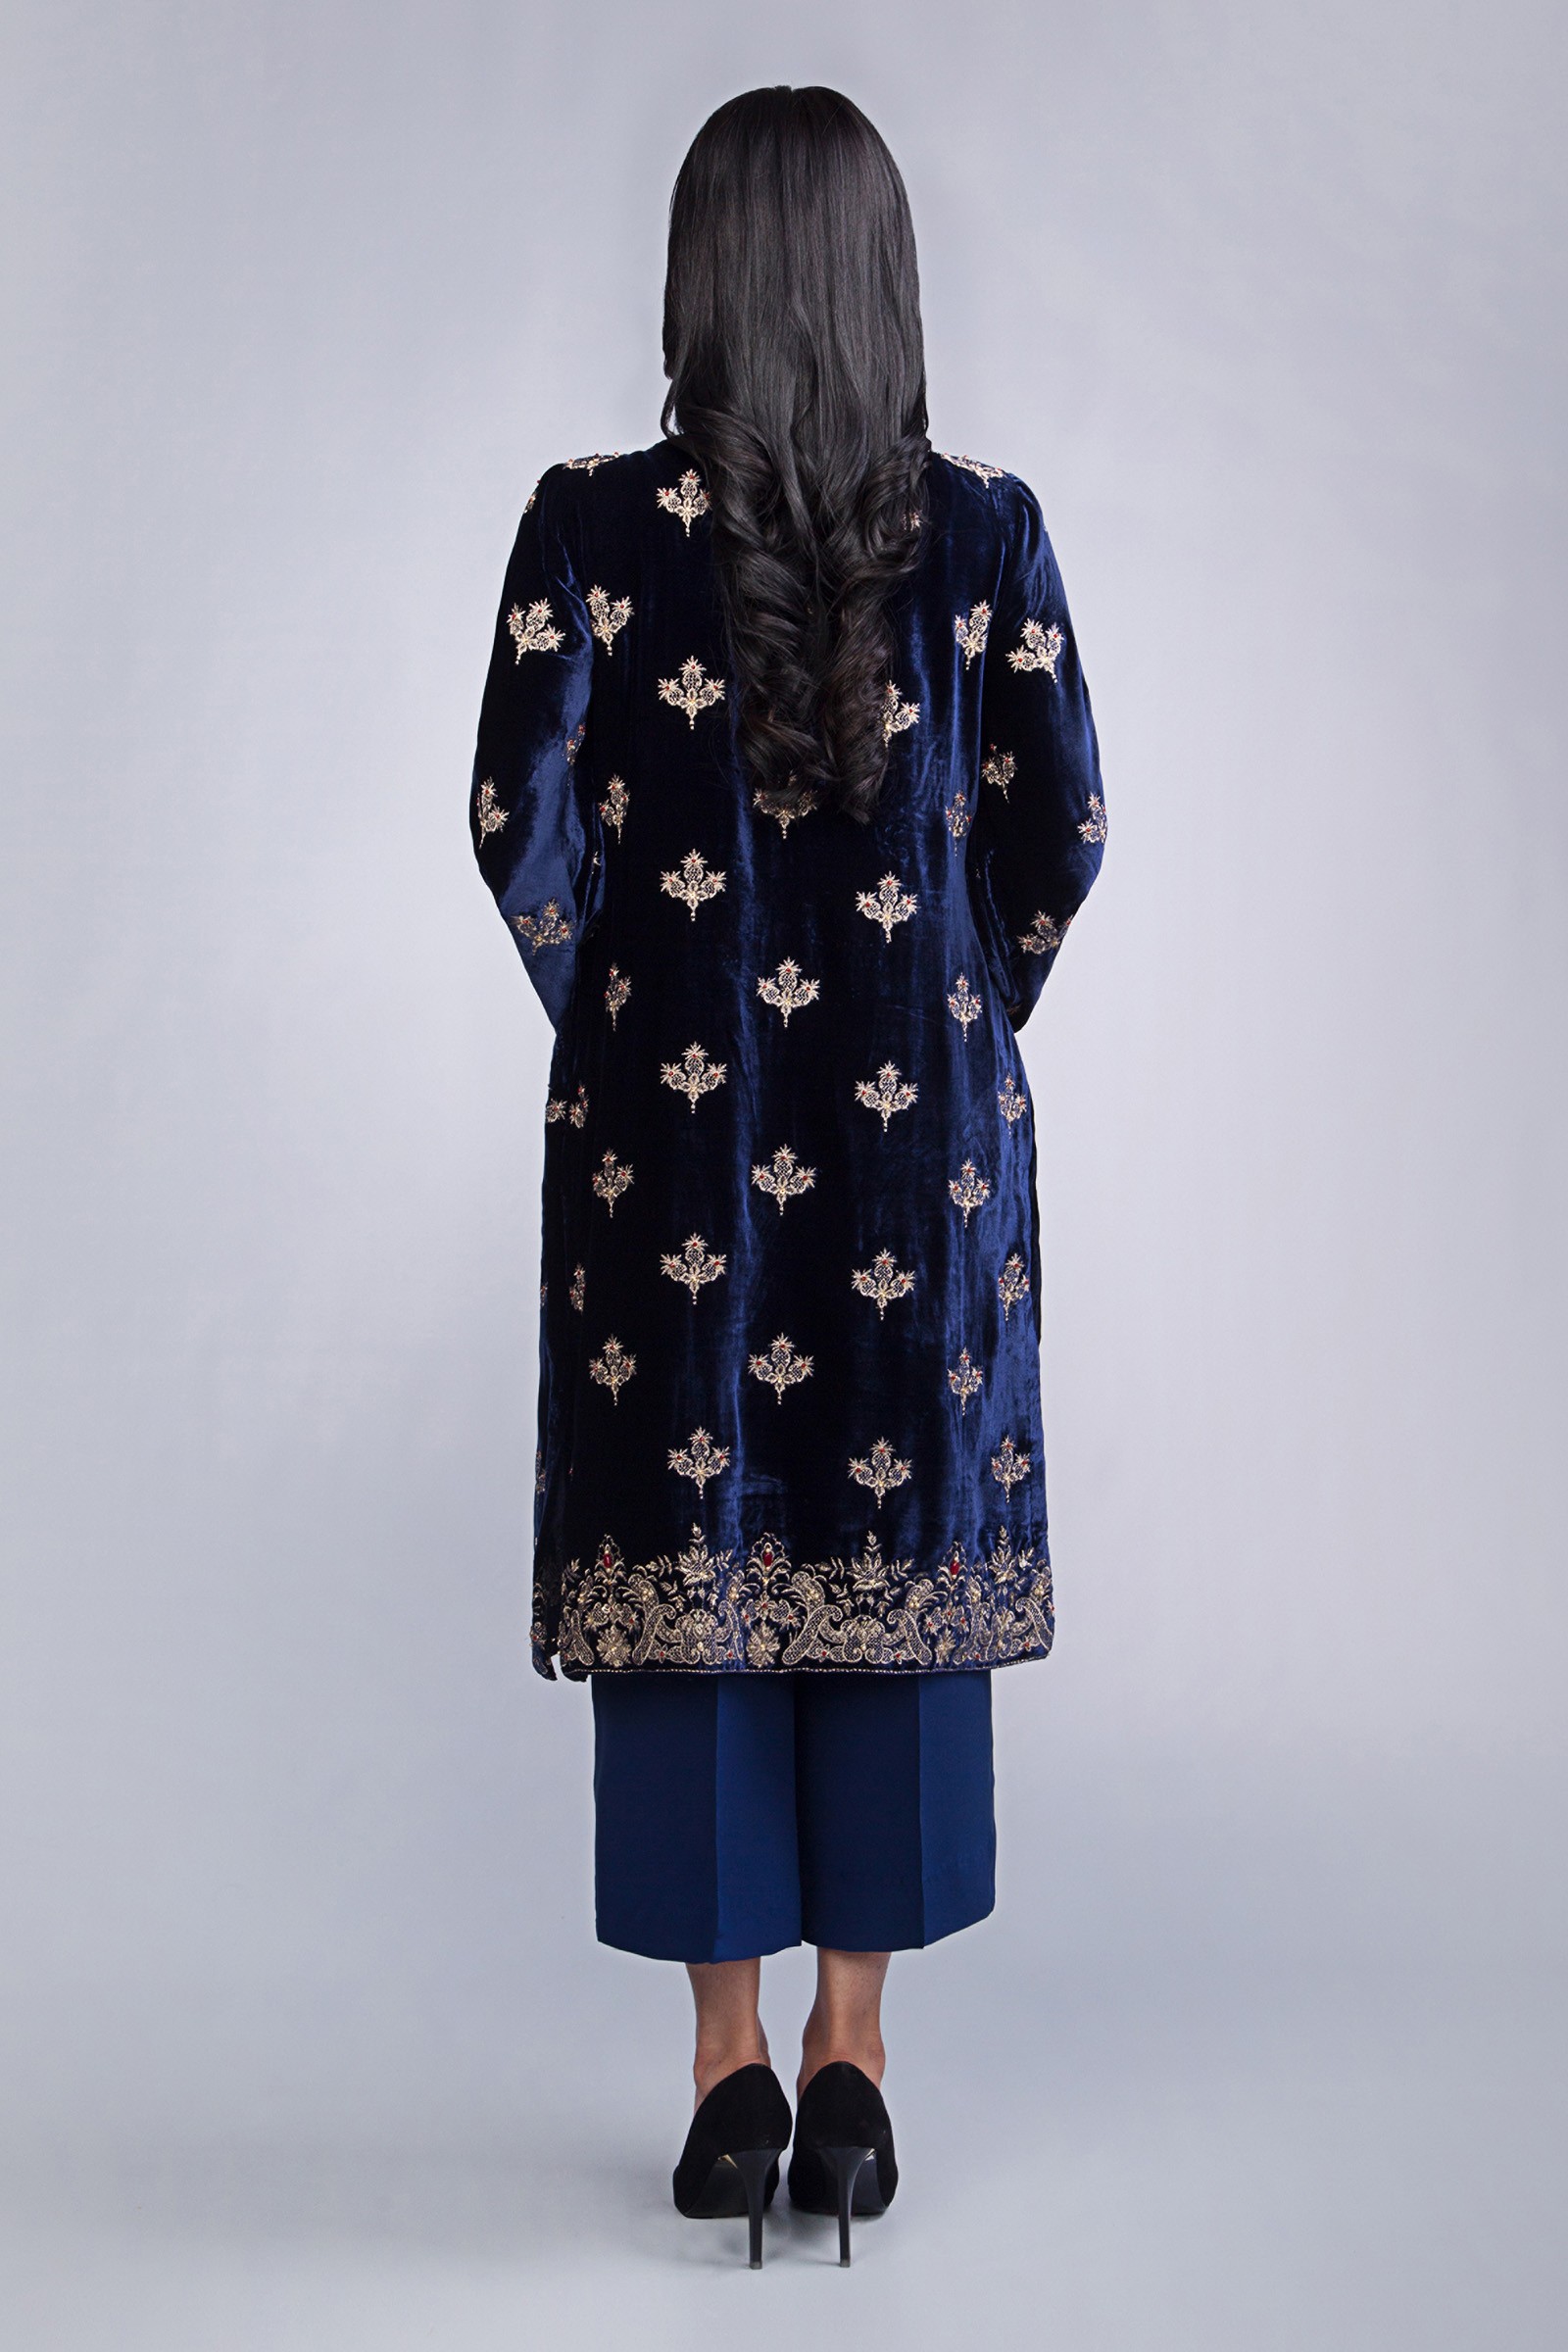 Elegant blue embroidered 3 piece suit by Bareeze outlet 2019